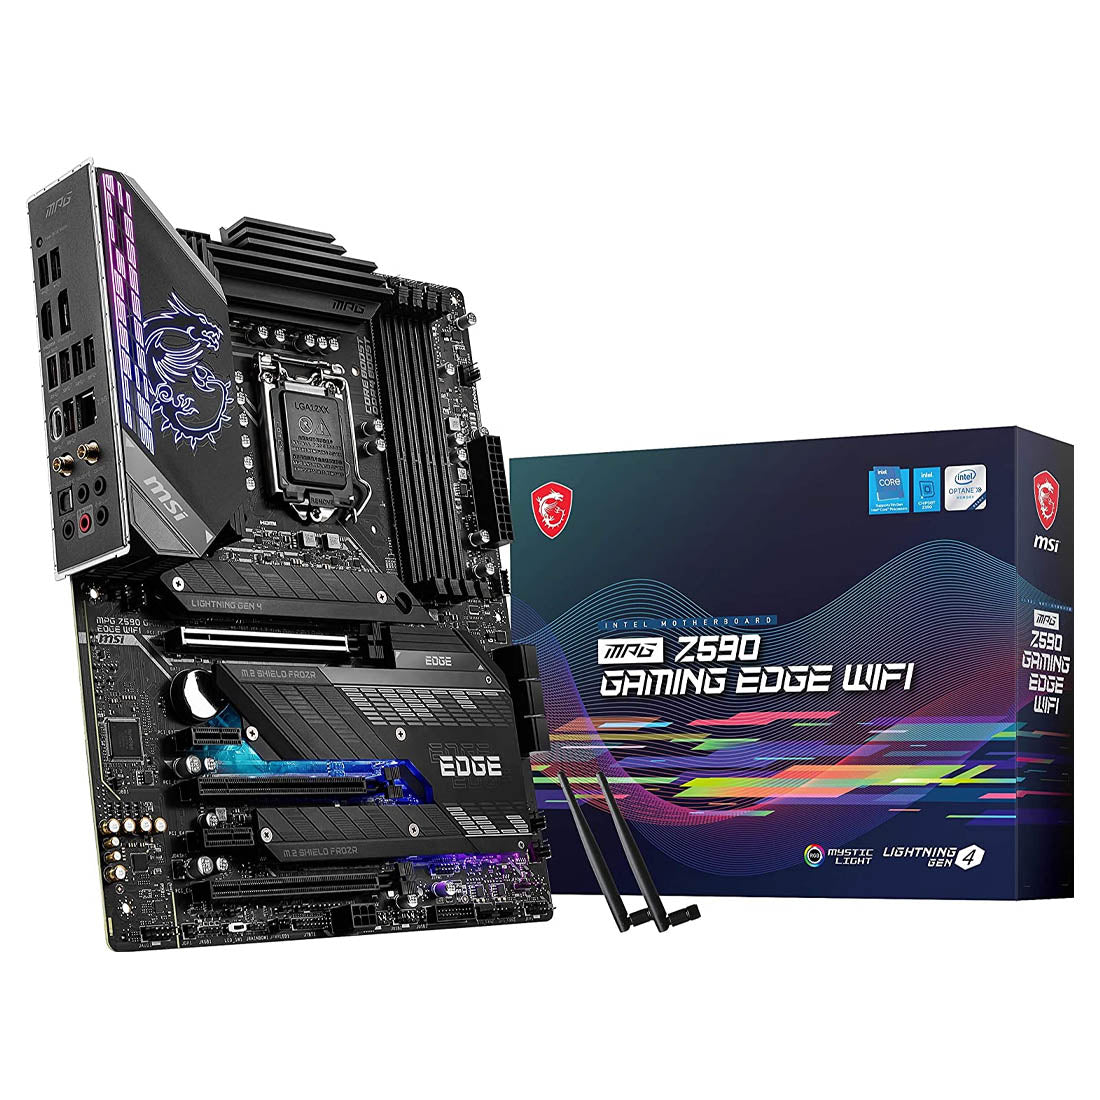 MSI MPG Z590 Gaming Edge WiFi LGA 1200 ATX Motherboard with WiFi 6E Antenna and Frozr AI Cooling